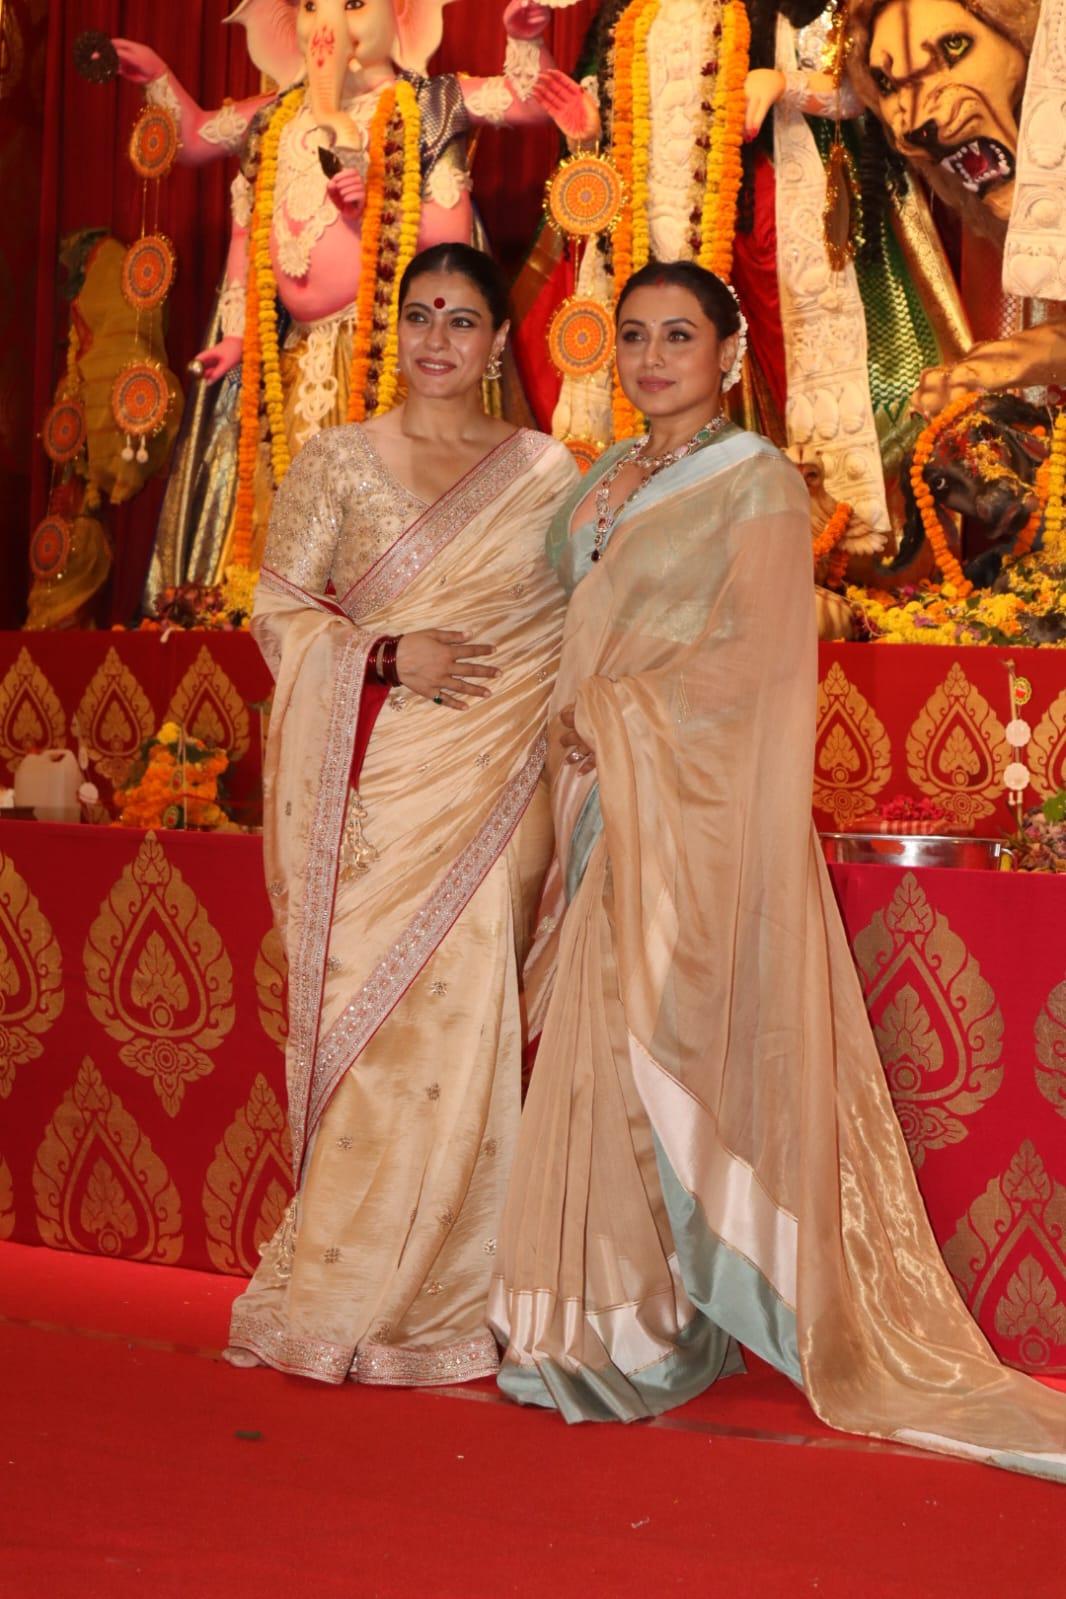 Kajol and Rani Mukerji posed together as they were spotted at their family's puja pandal